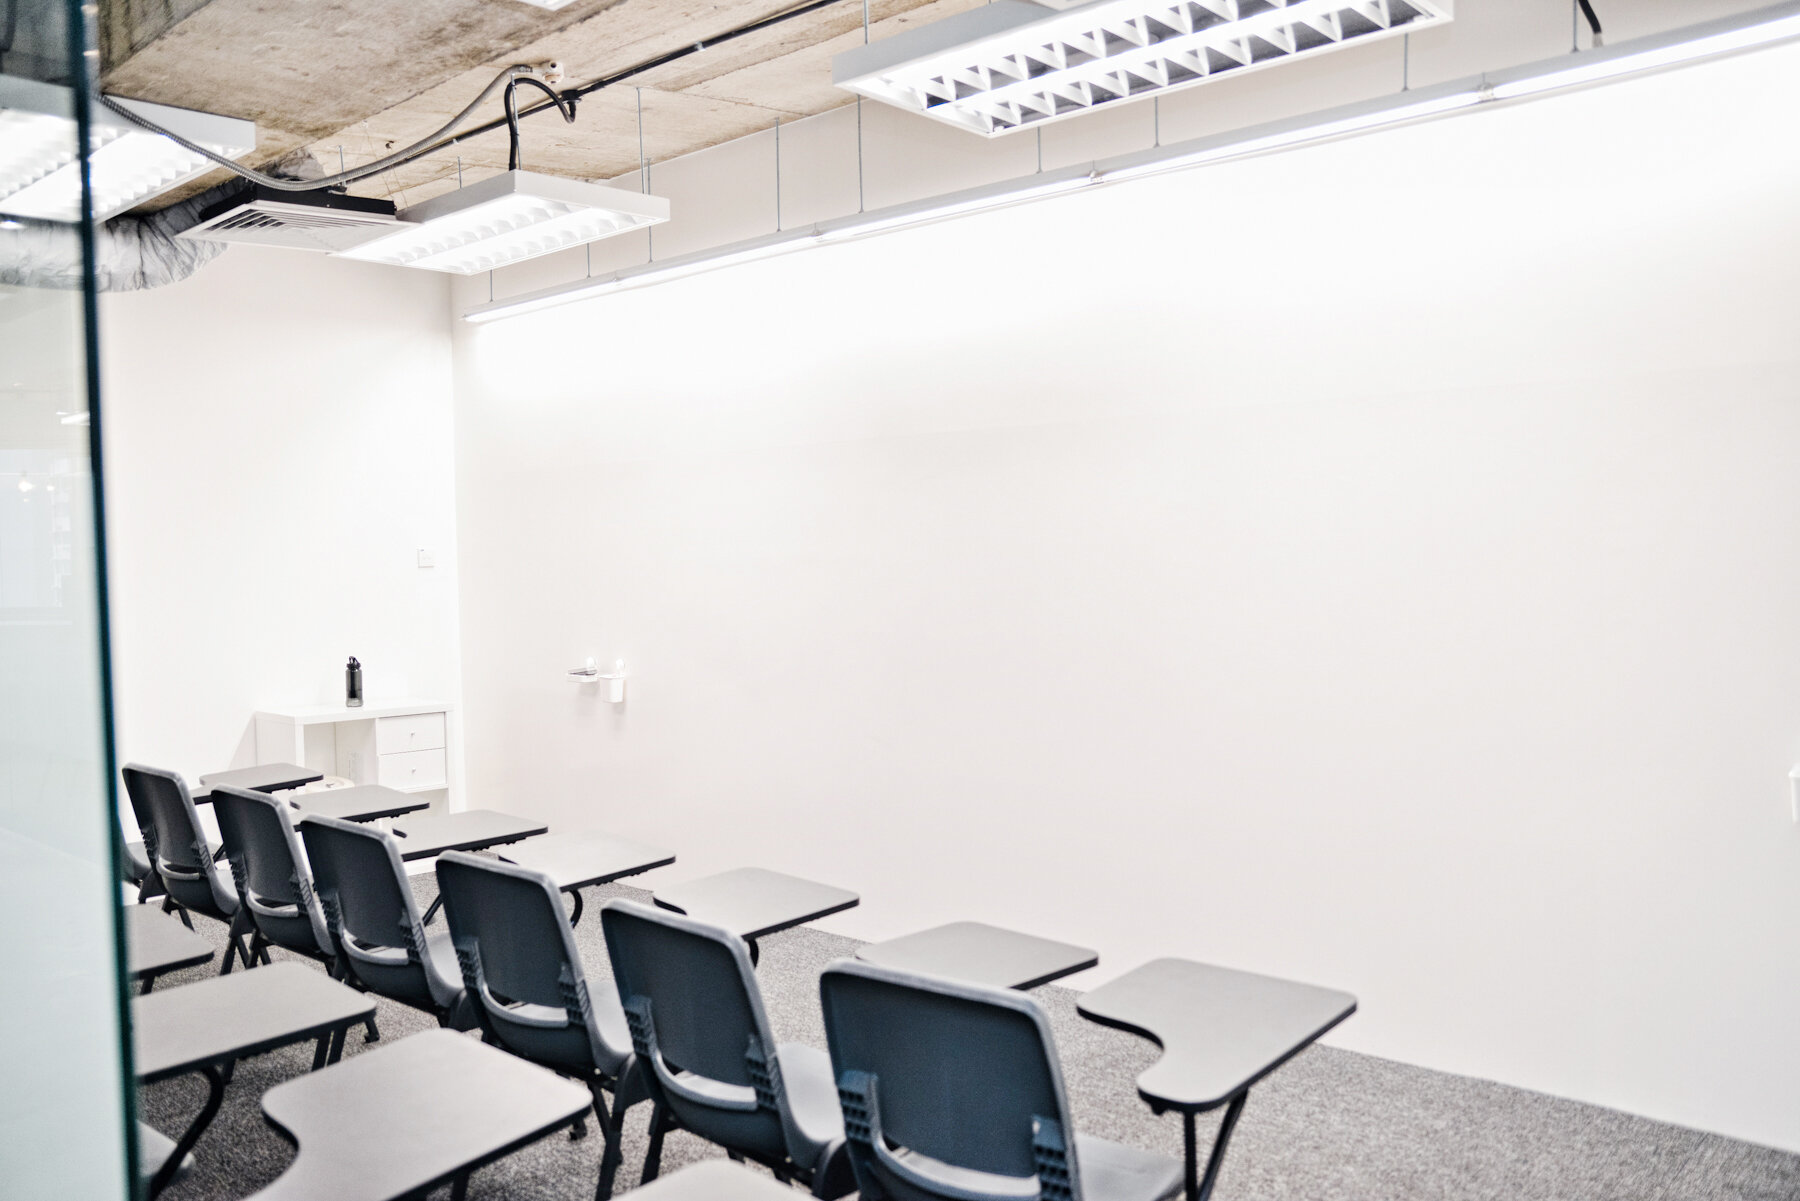 Achevas Tuition - IdeaPaint dry erase walls without the boundaries and limitations of whiteboard panels, turns any surface into an impromptu creative and teaching opportunity.